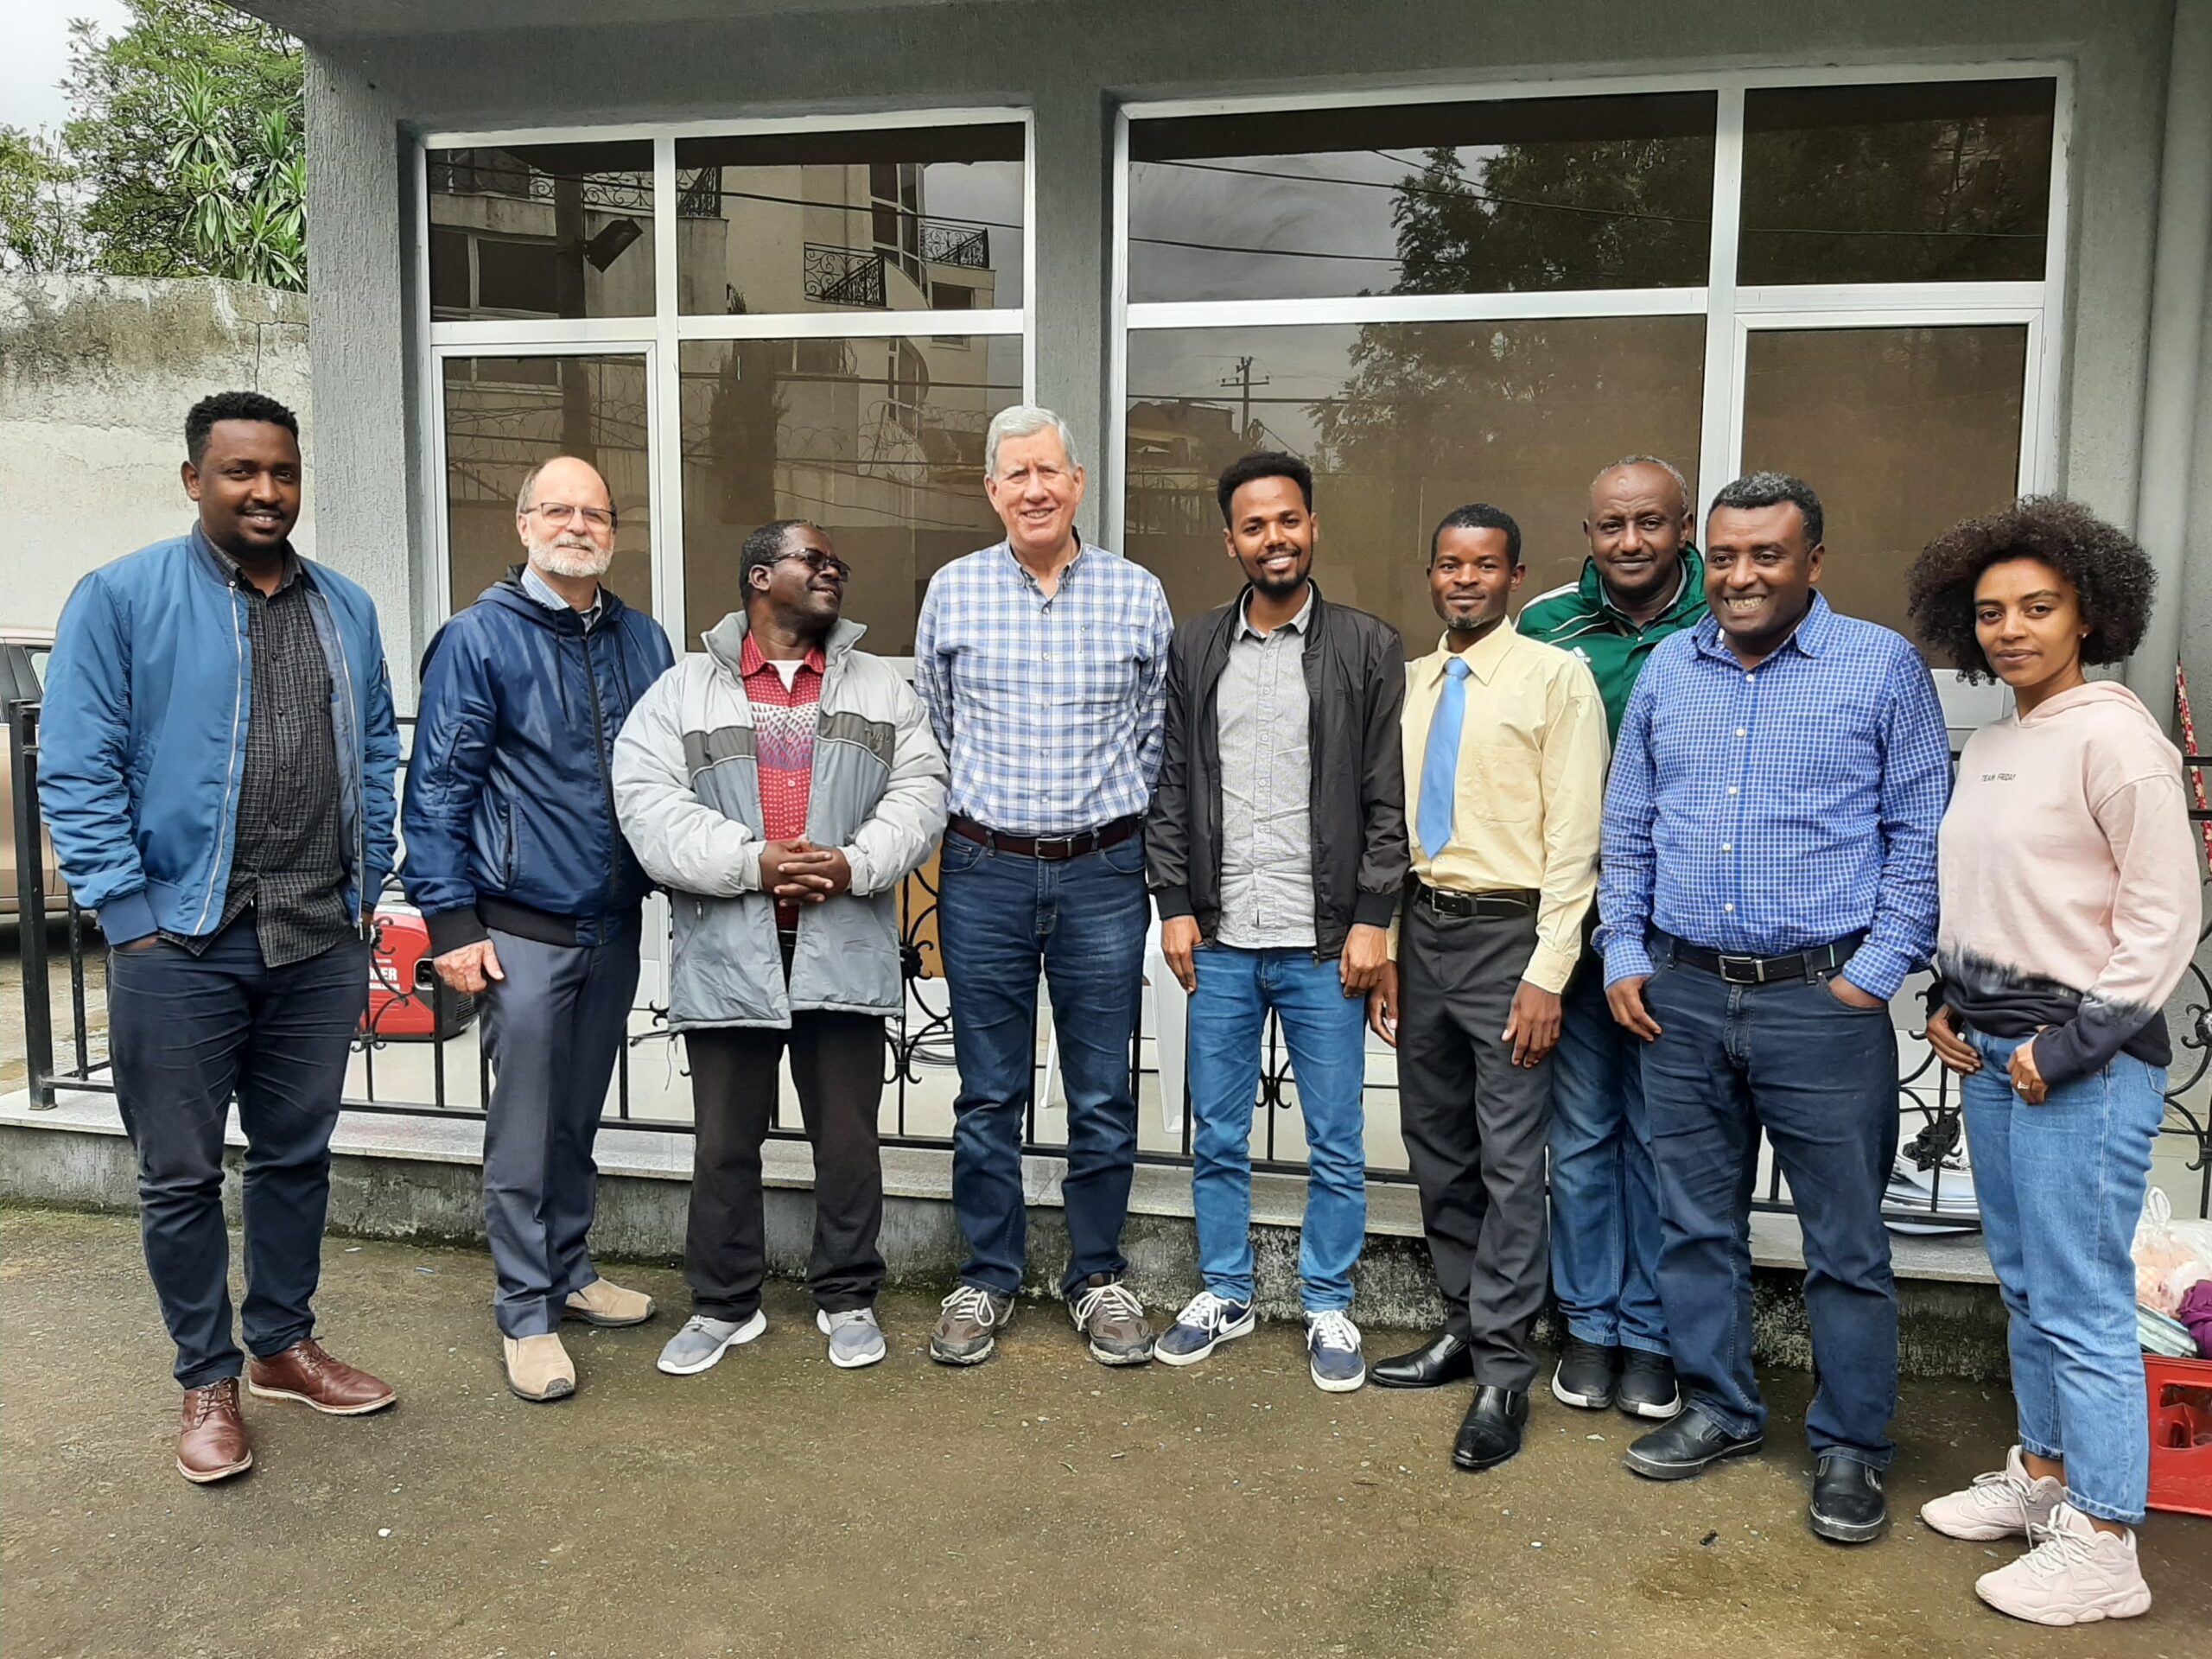 Ethiopia Students and Mentors